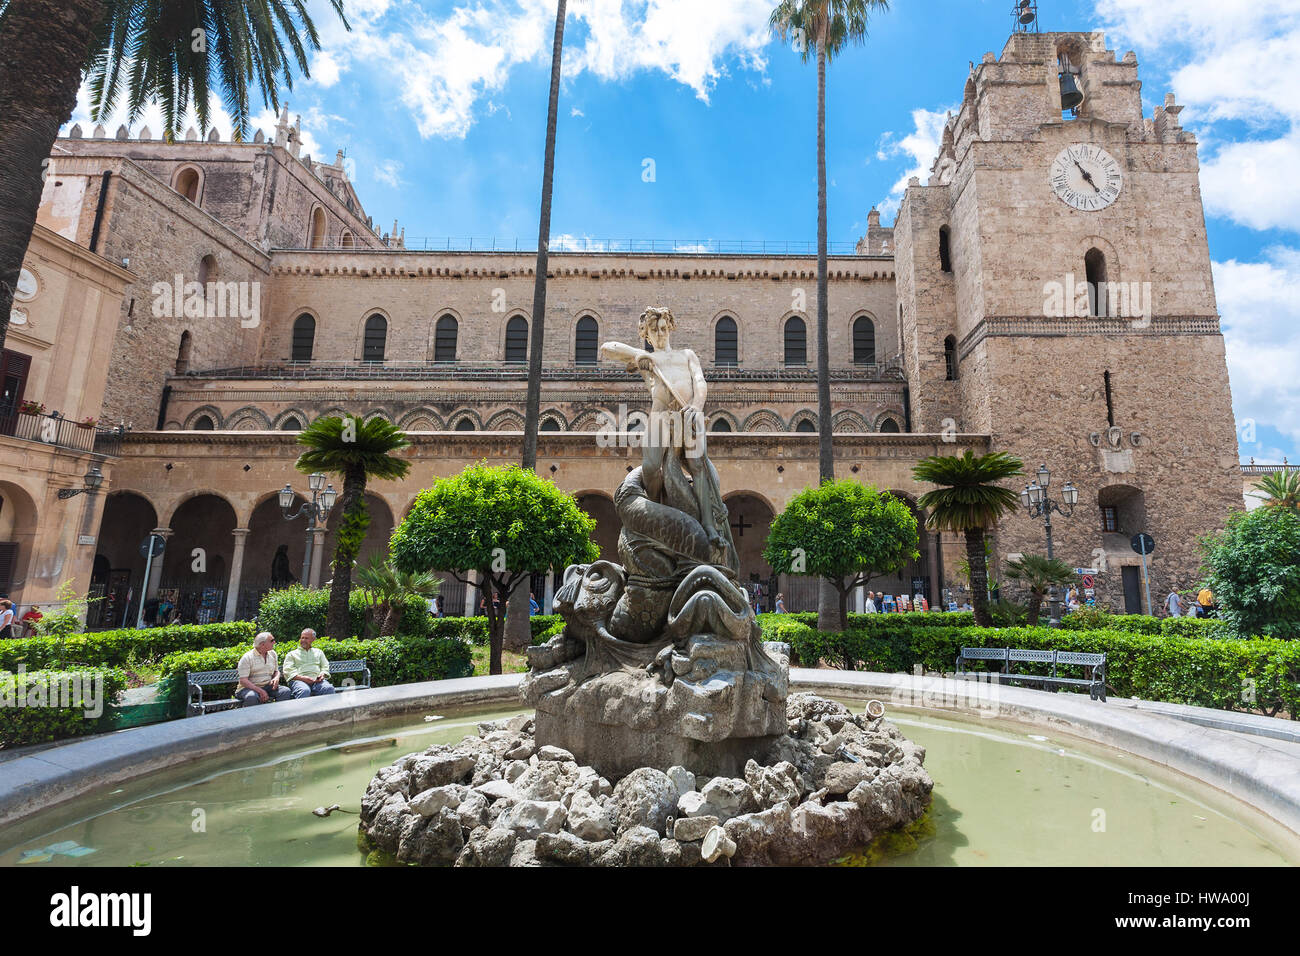 MONREALE, ITALY - JUNE 25, 2011: people and fountain near Duomo in Monreale town in Sicily. The cathedral of Monreale is one of the greatest examples  Stock Photo